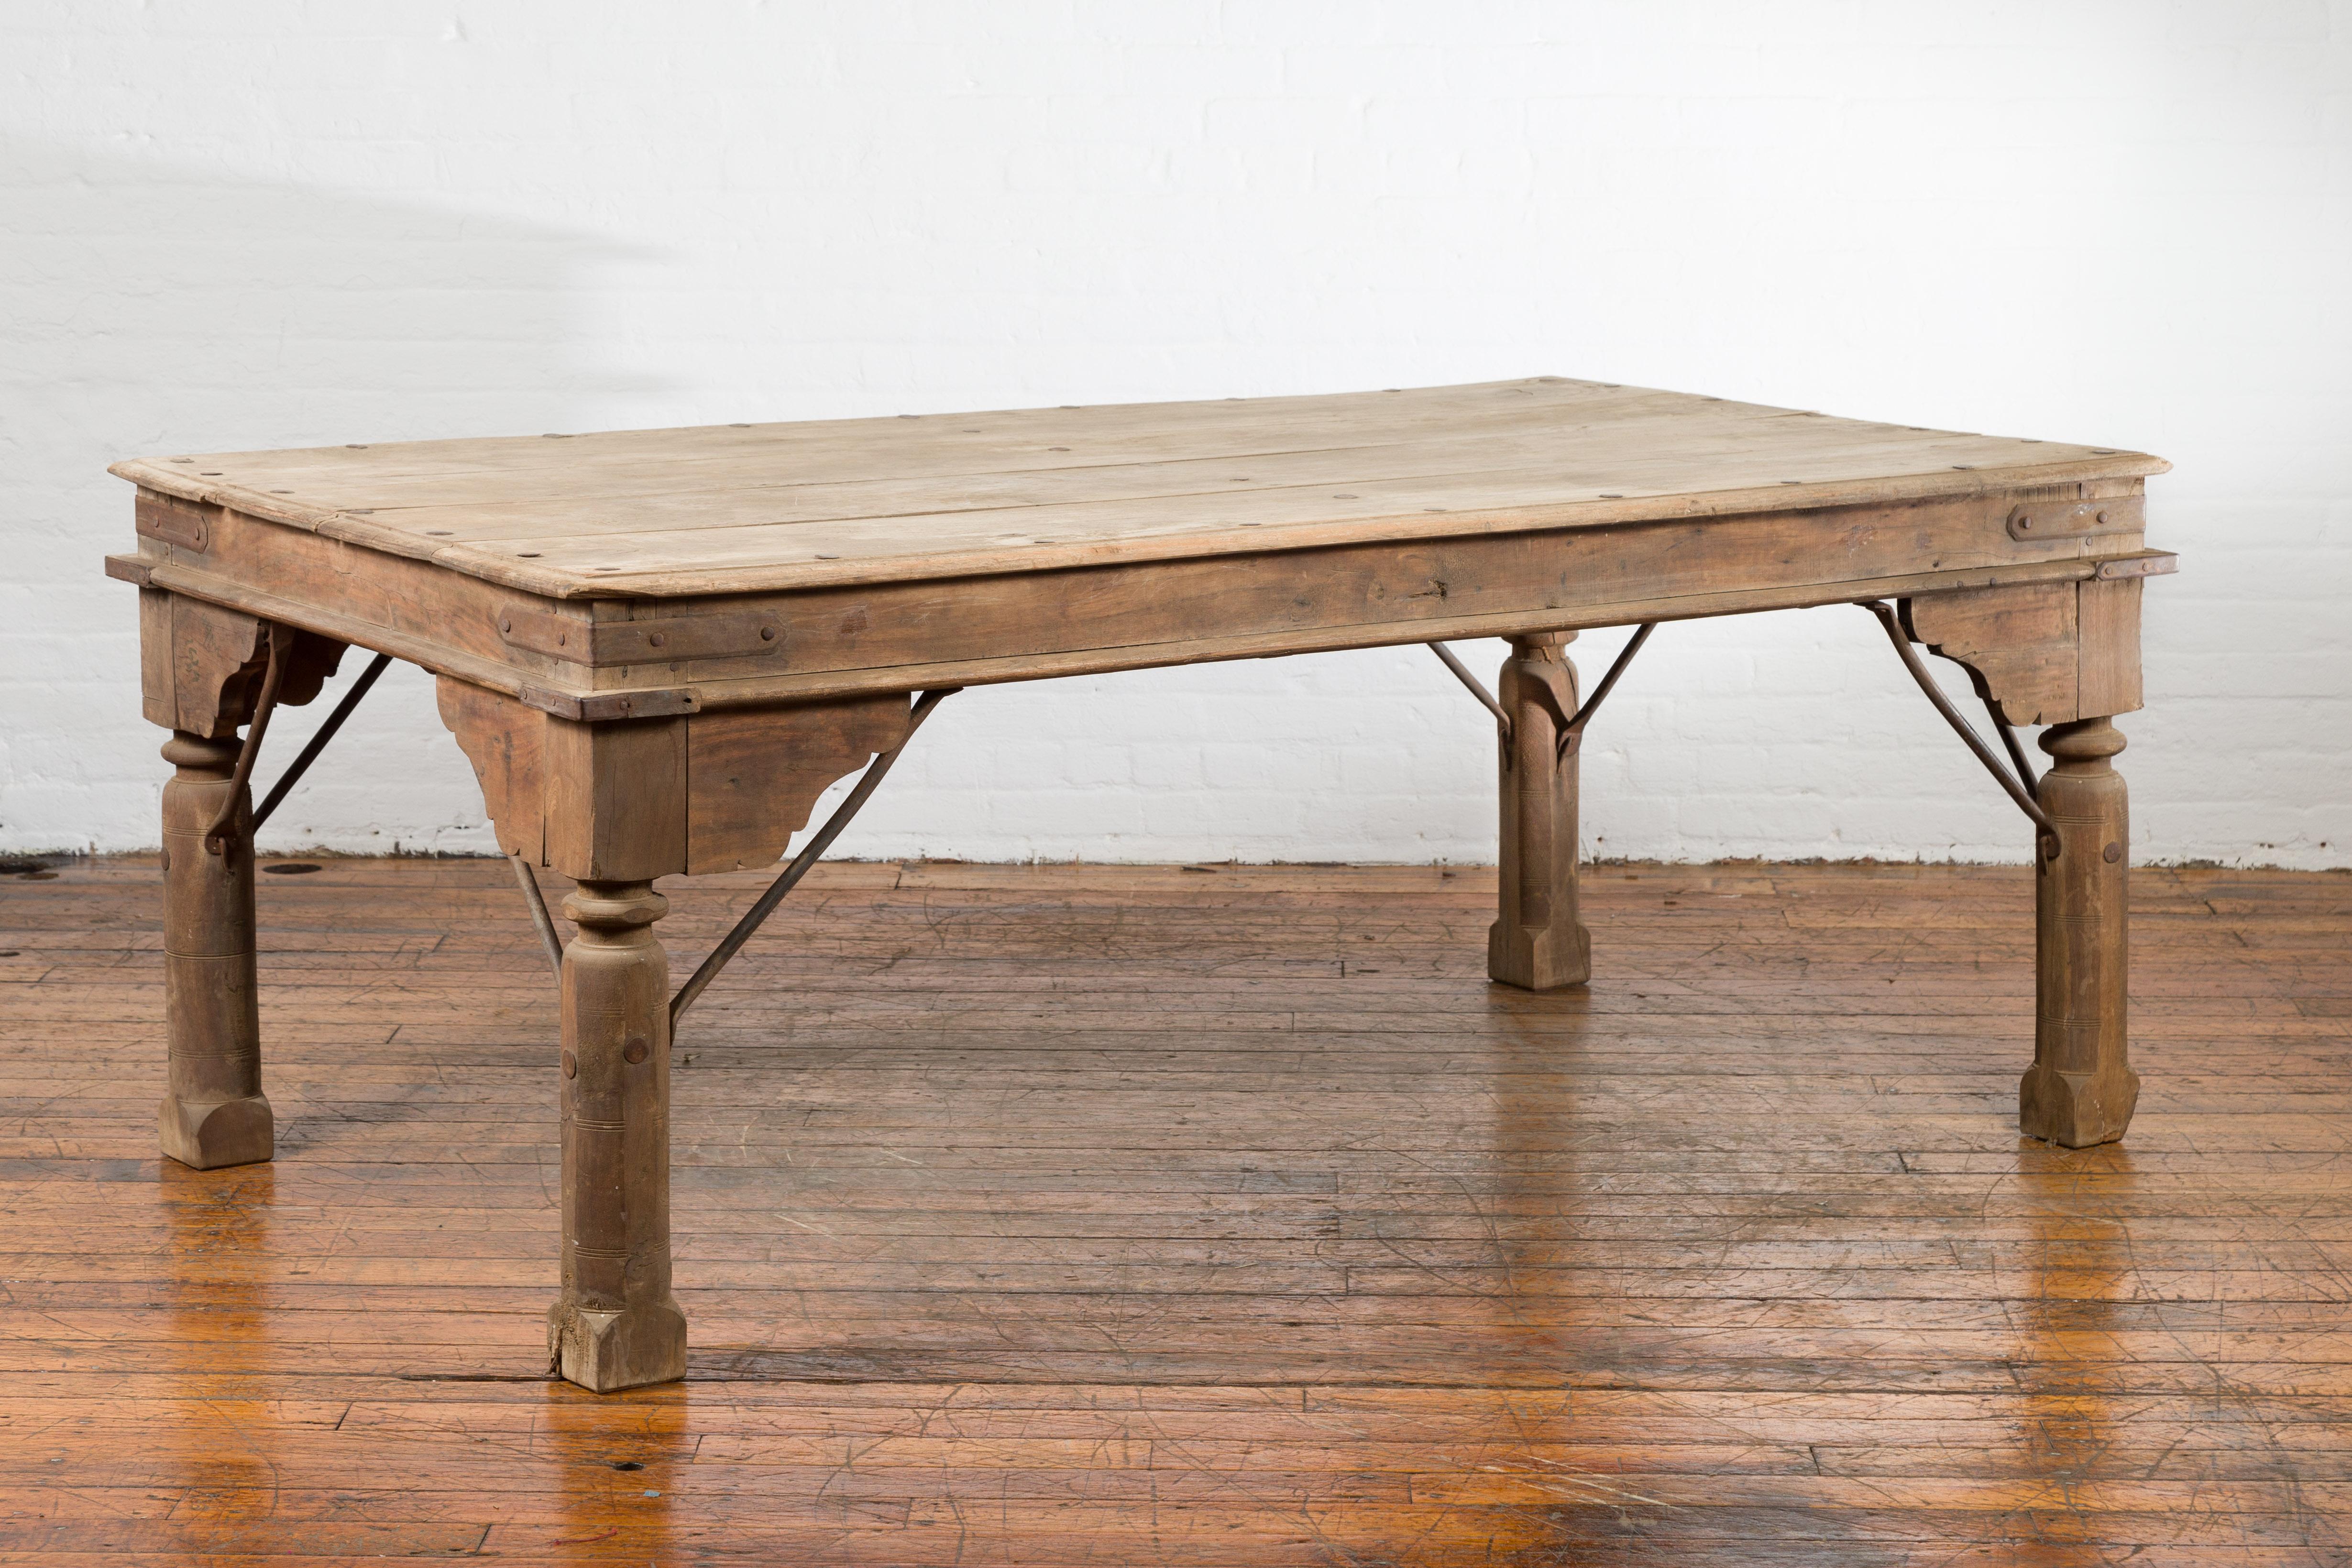 A large antique rustic Indian dining table from the 19th century, with iron details. Created in India during the 19th century, this dining table features a rectangular planked top with iron studs, sitting above a simple apron accented with iron